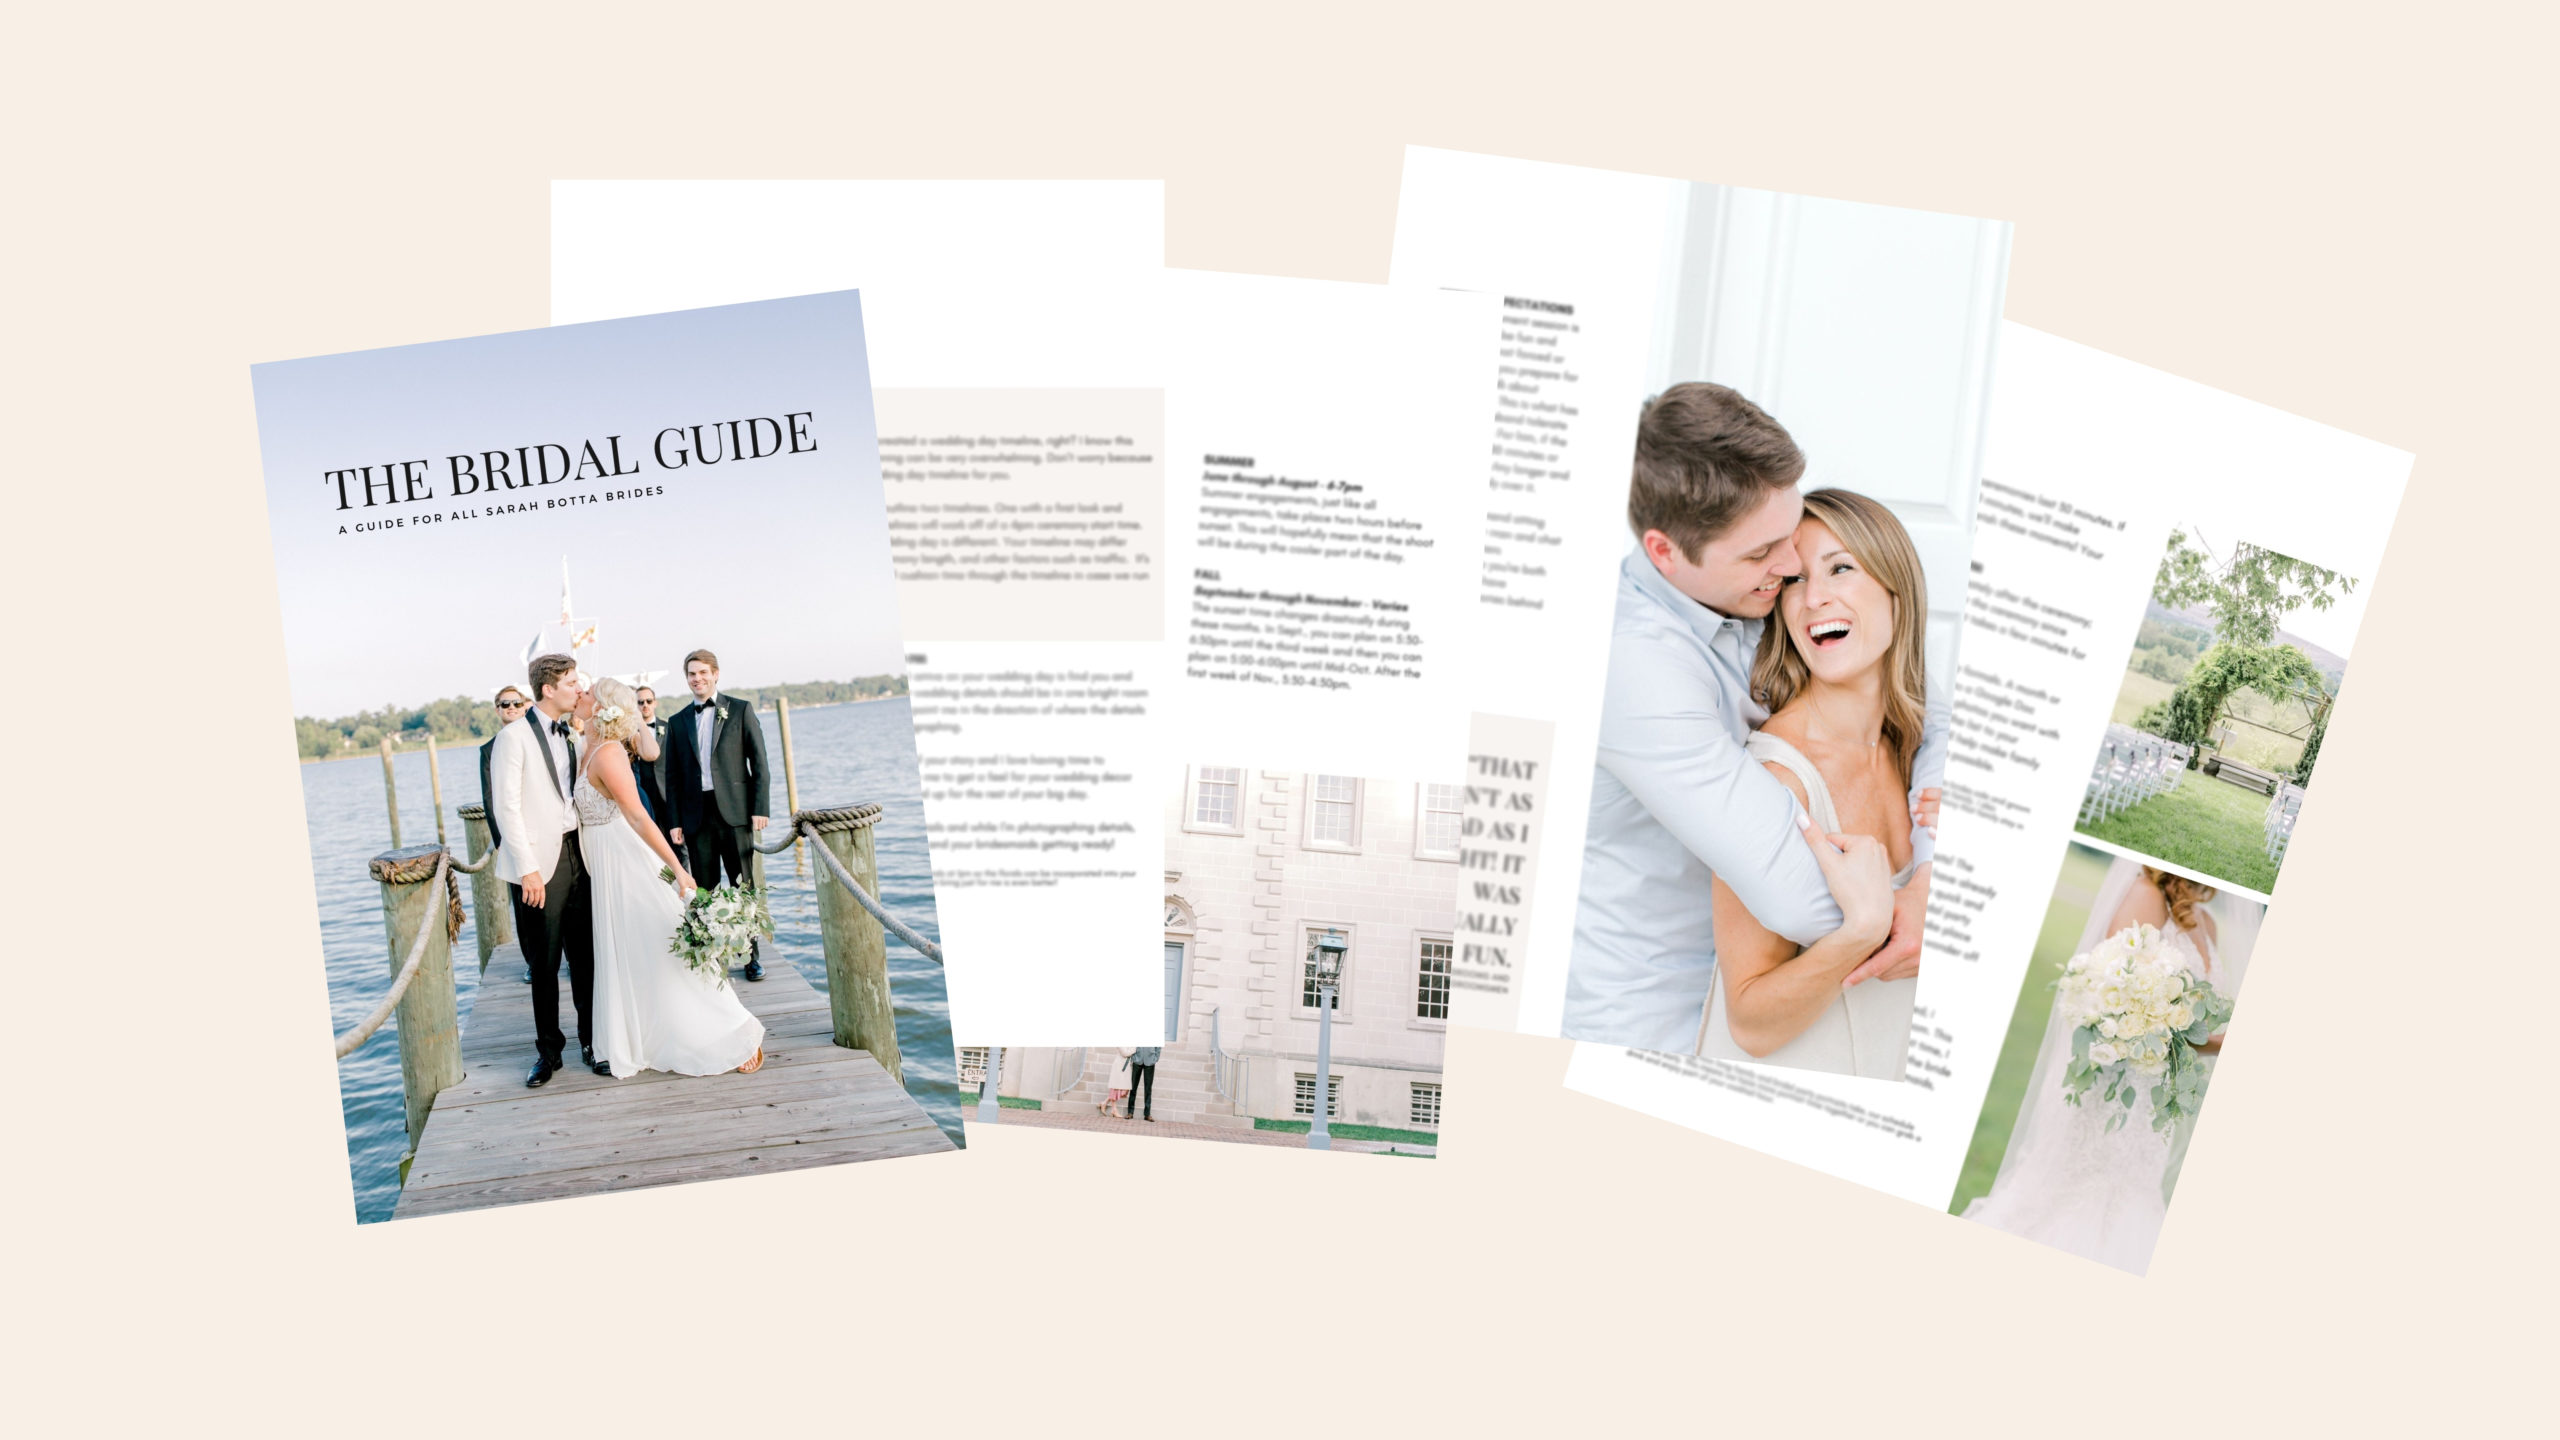 The Bridal Guide designed in Canva